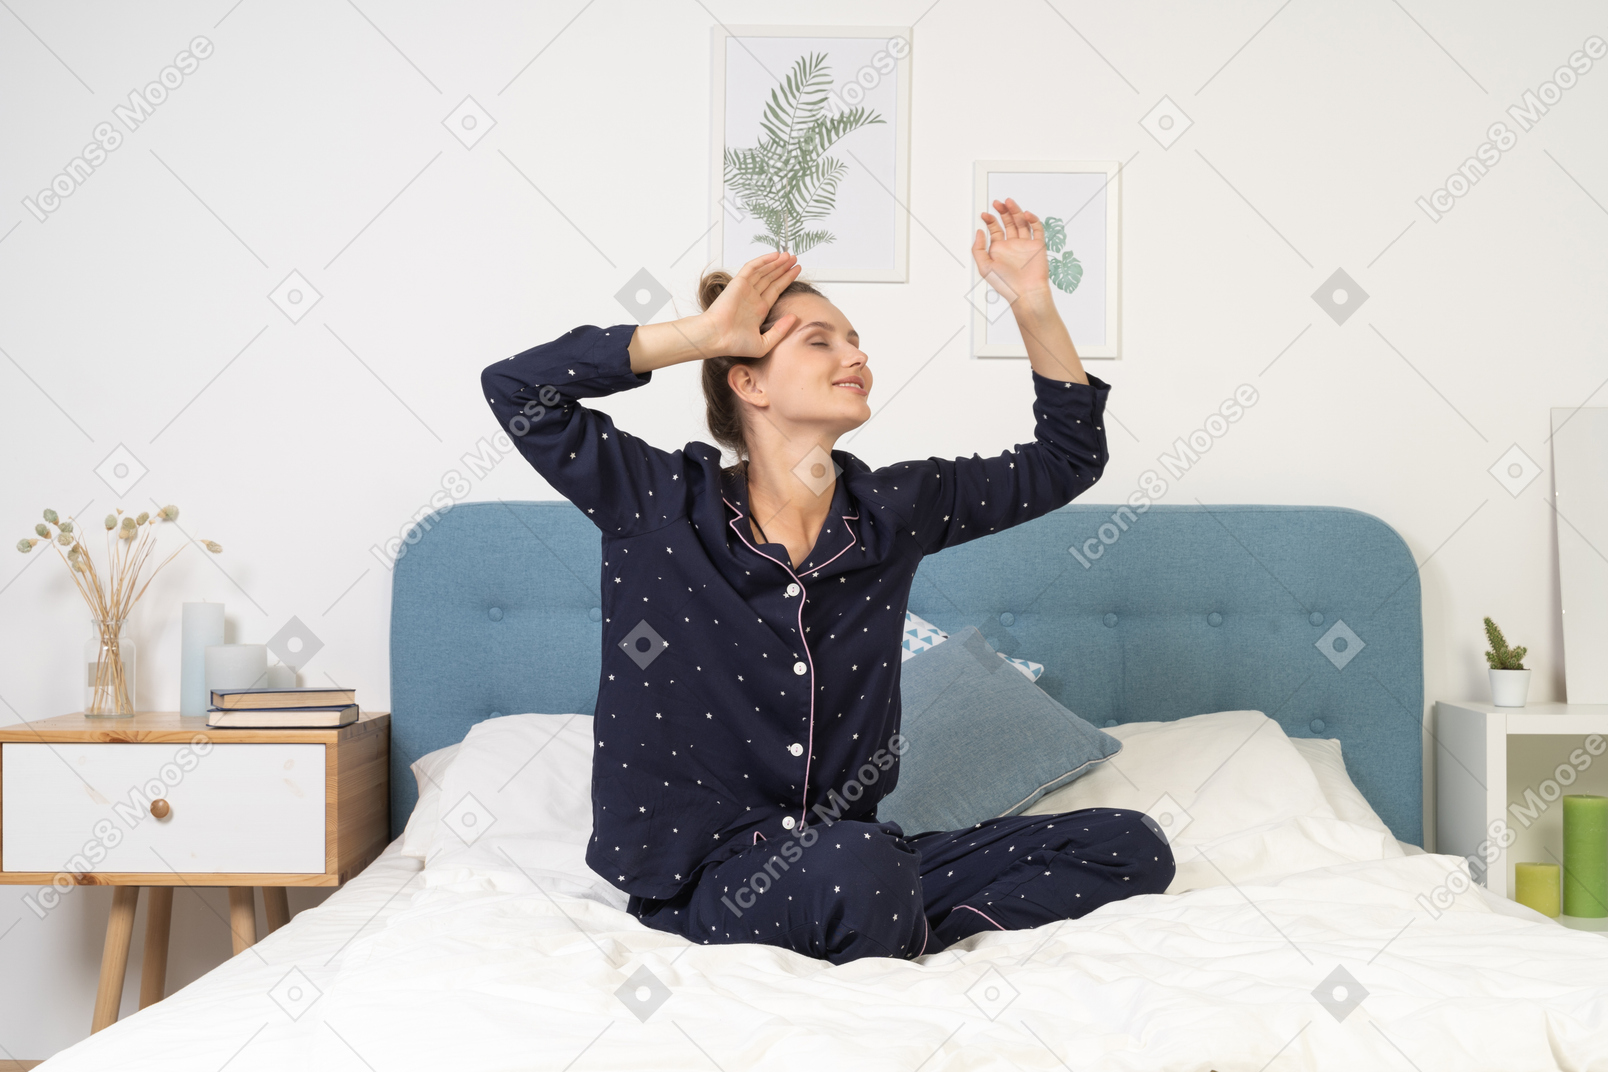 Front view of a young lady in pajamas waking up & staying in bed